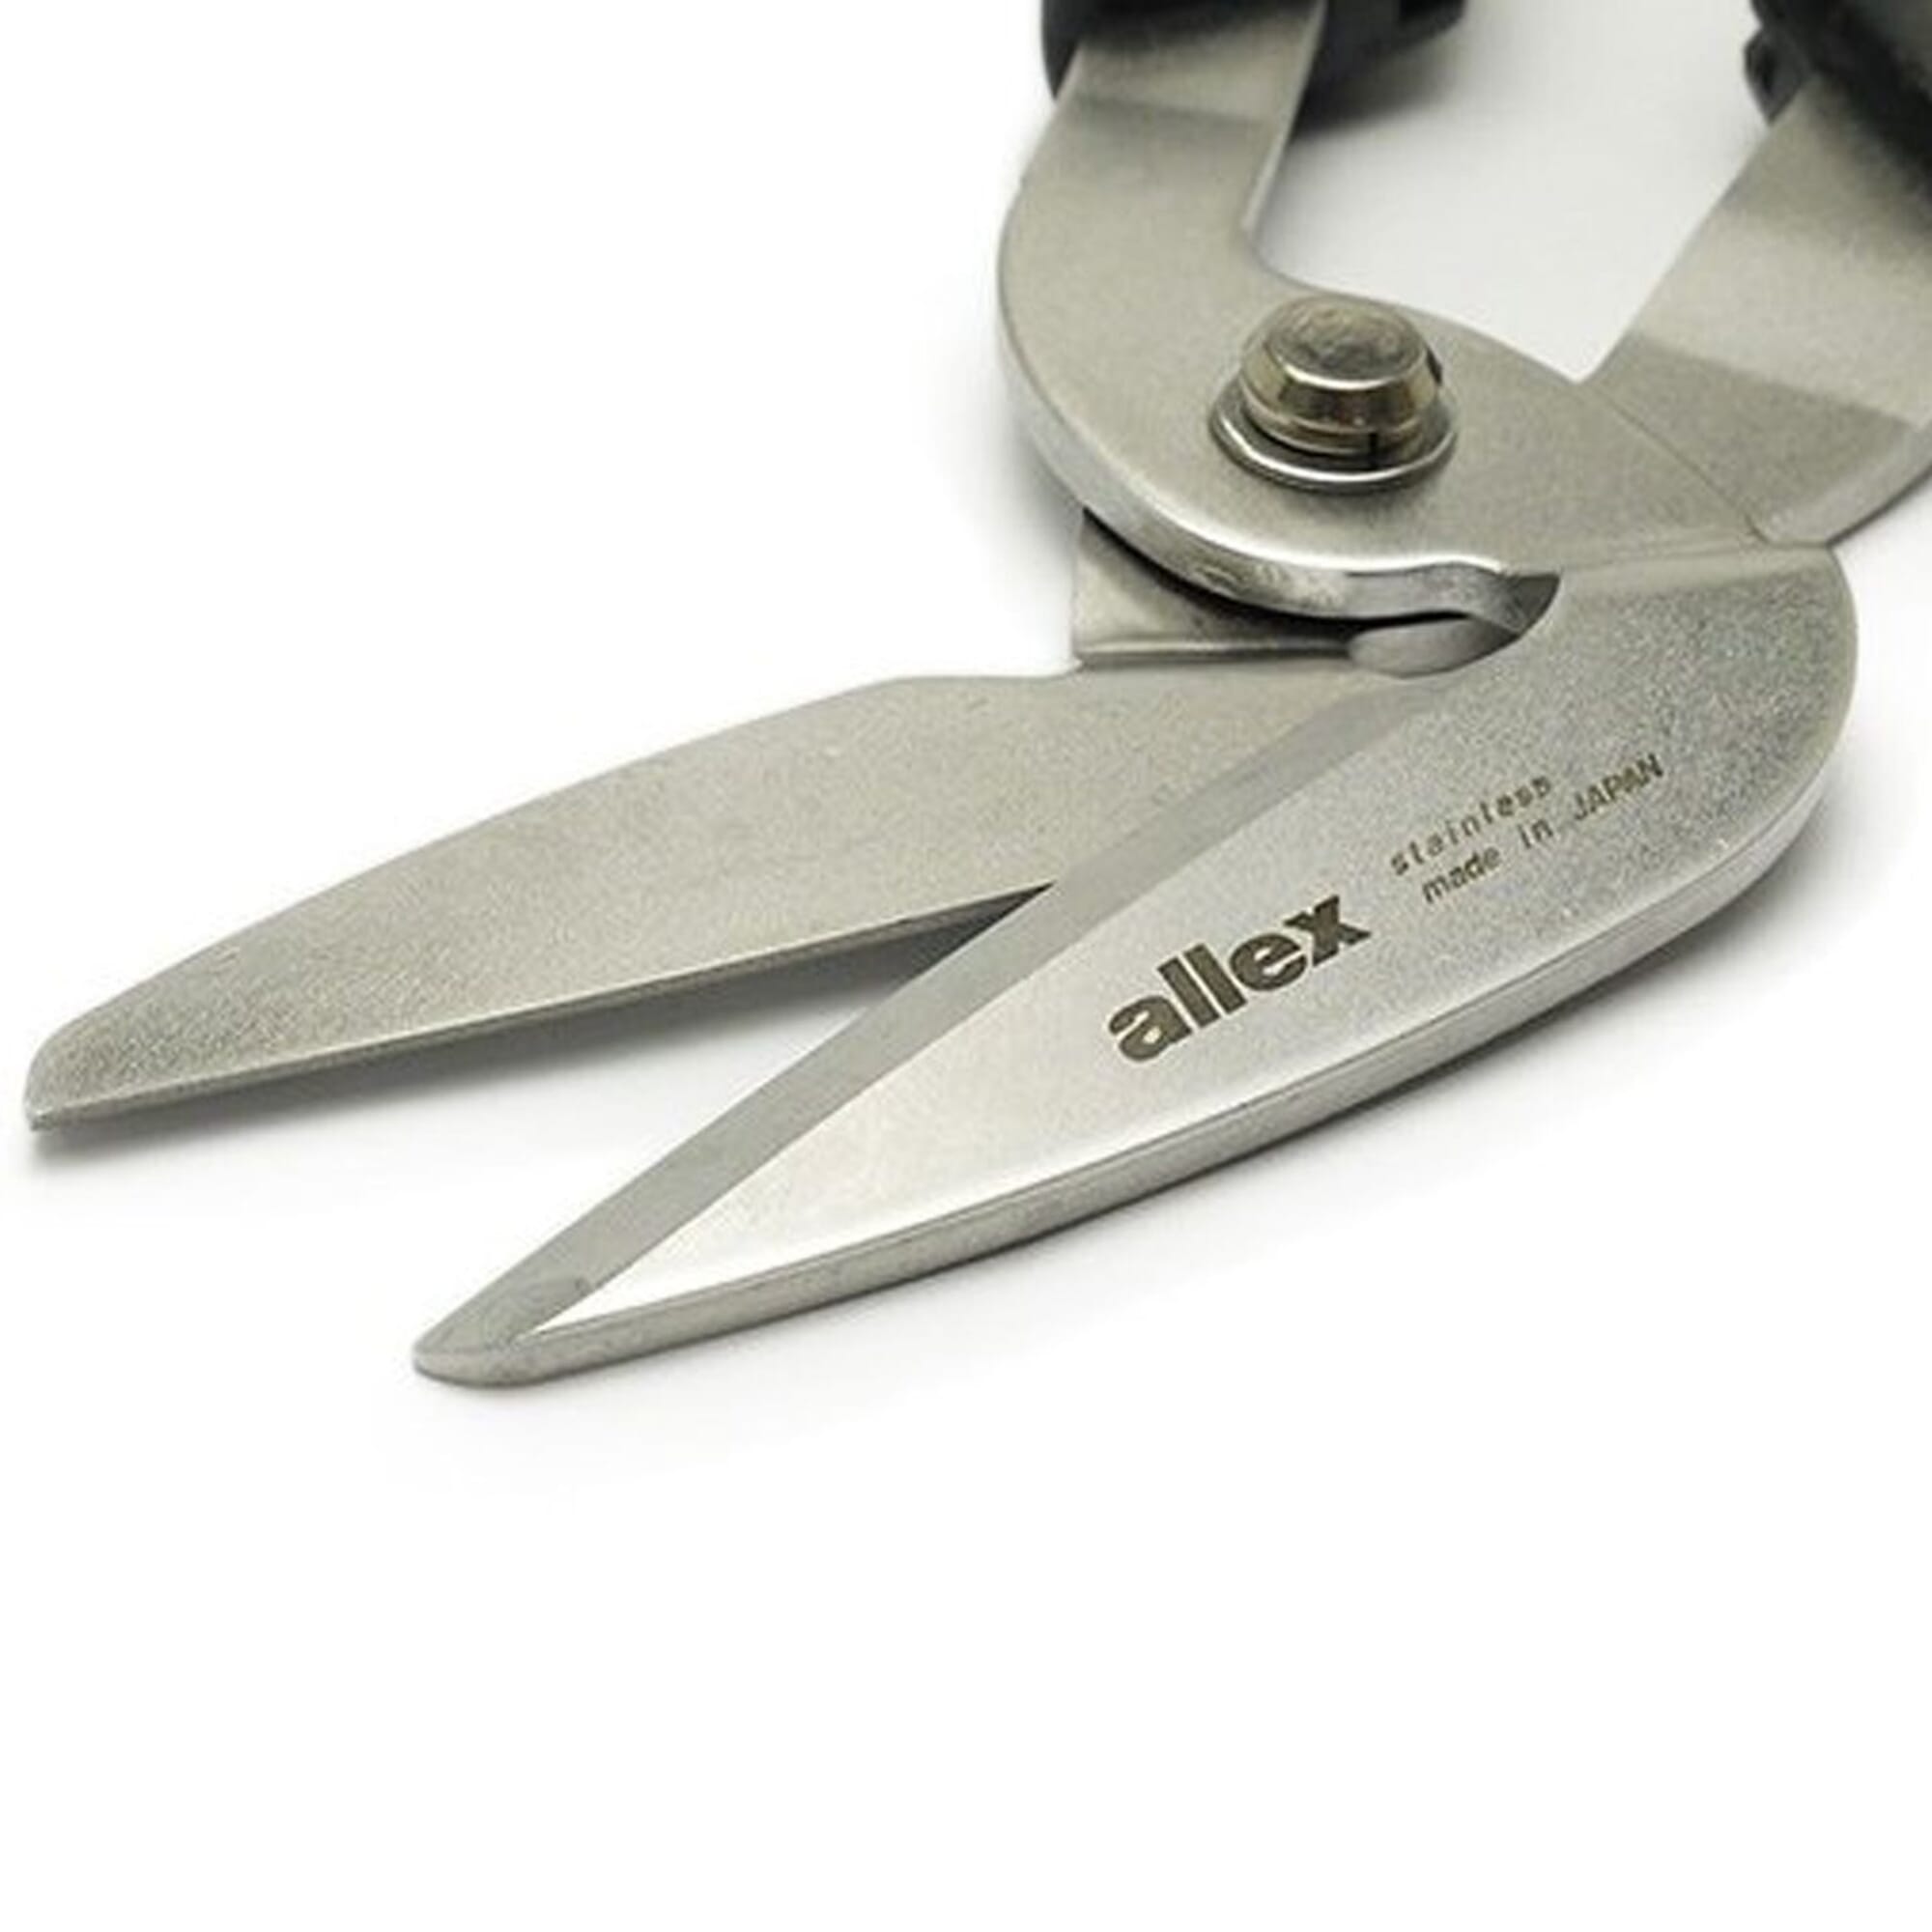 ALLEX Super Hard Spring Loaded Cardboard Scissors, Heavy Duty Shears for  Thick Paper and Cardboard Box, Finest Stainless Steel Made in Japan